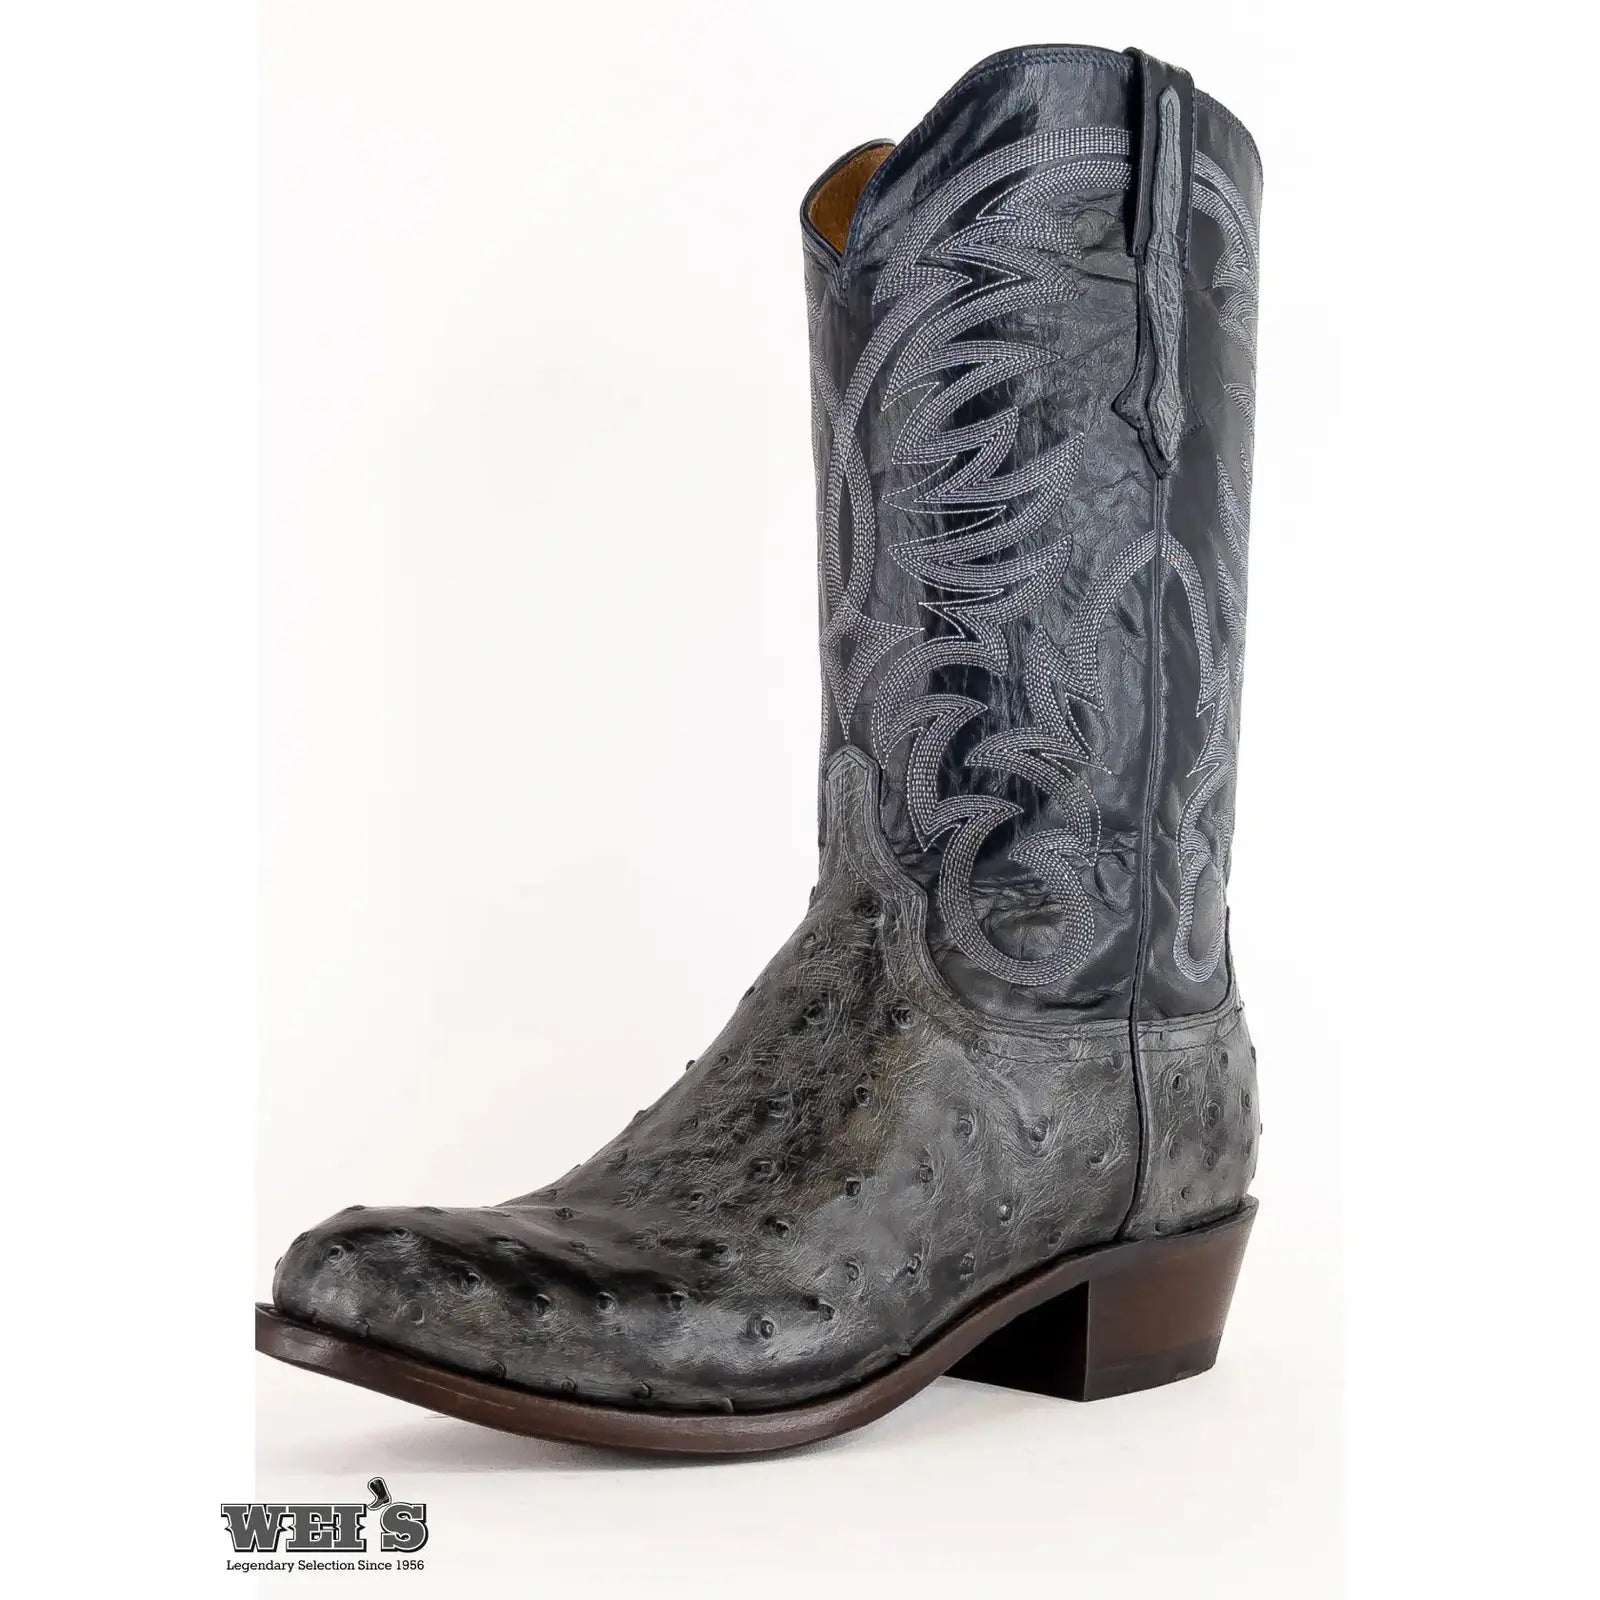 Lucchese Men's Cowboy Boots 14" Exotic Ostrich Grey Roper Toe N1195.R3